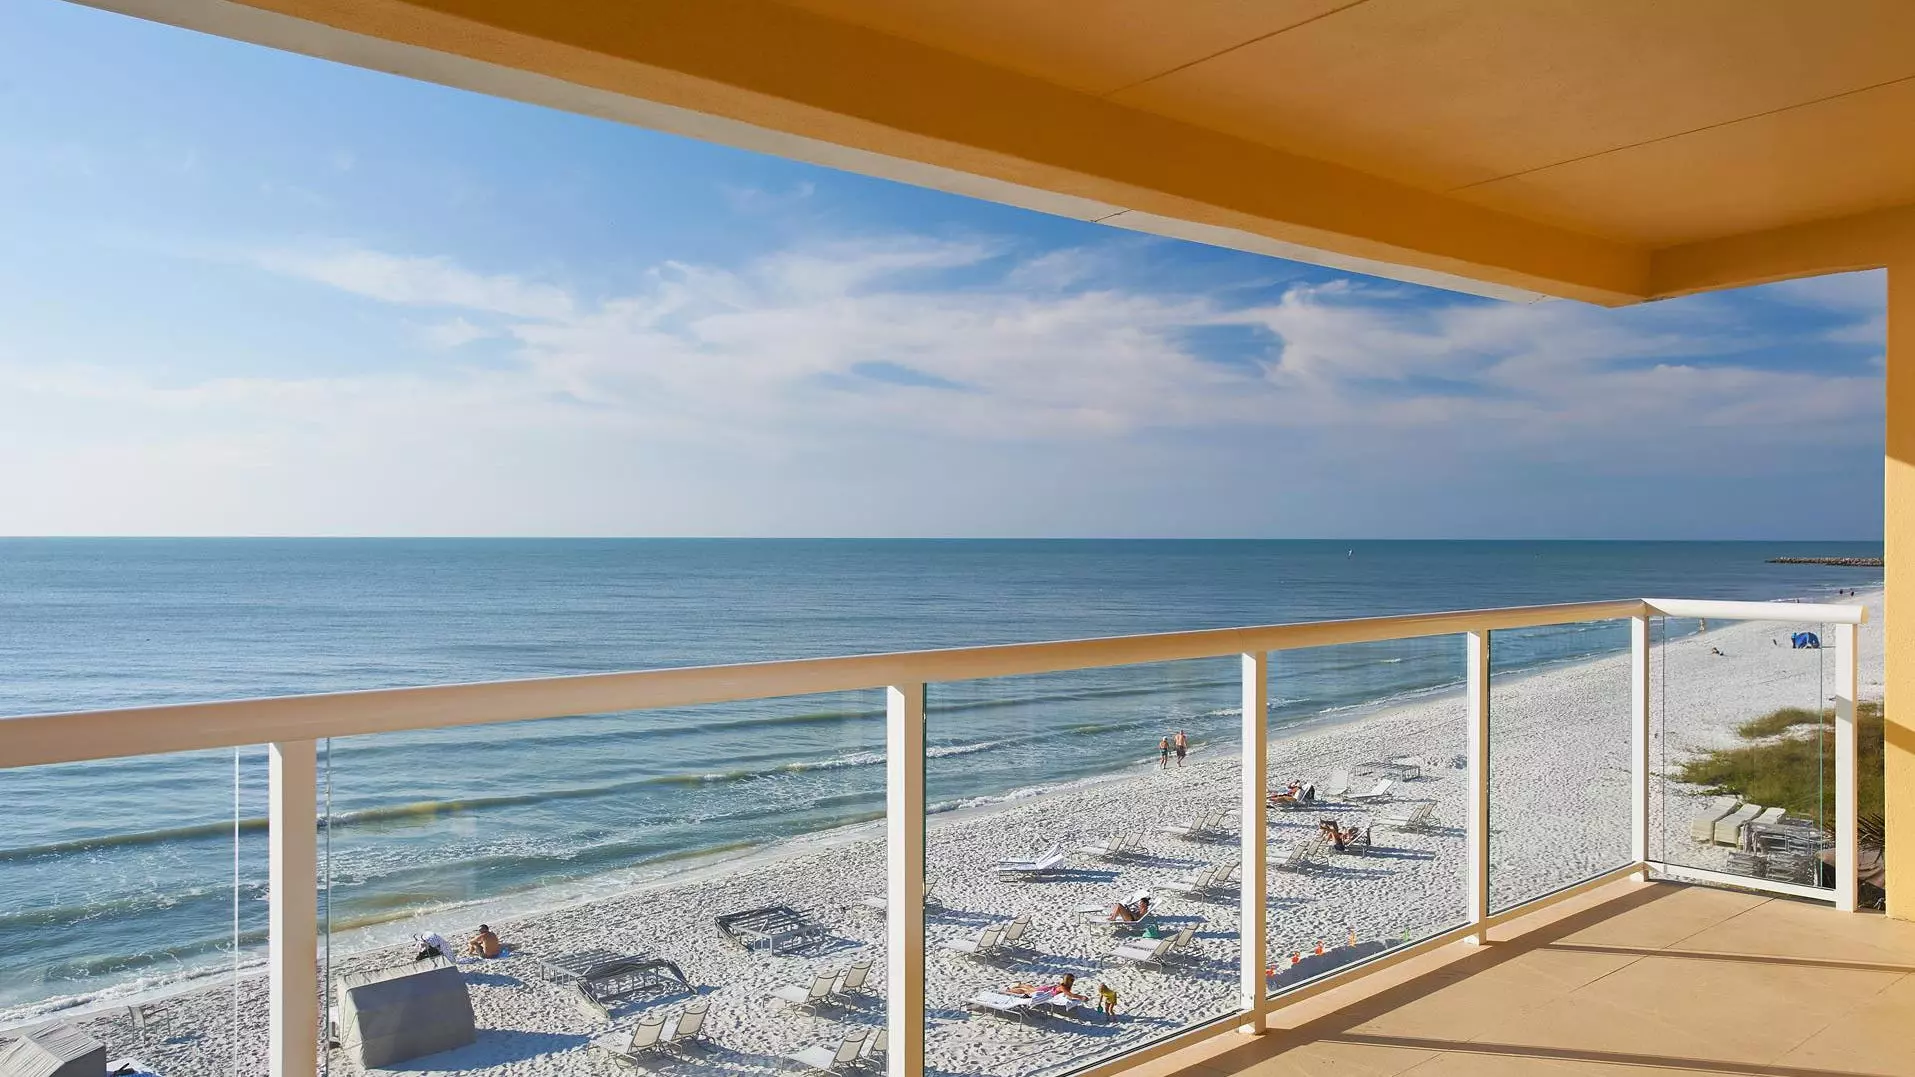 Edgewater Beach Hotel’s glass-walled balconies maximize Gulf-front views.